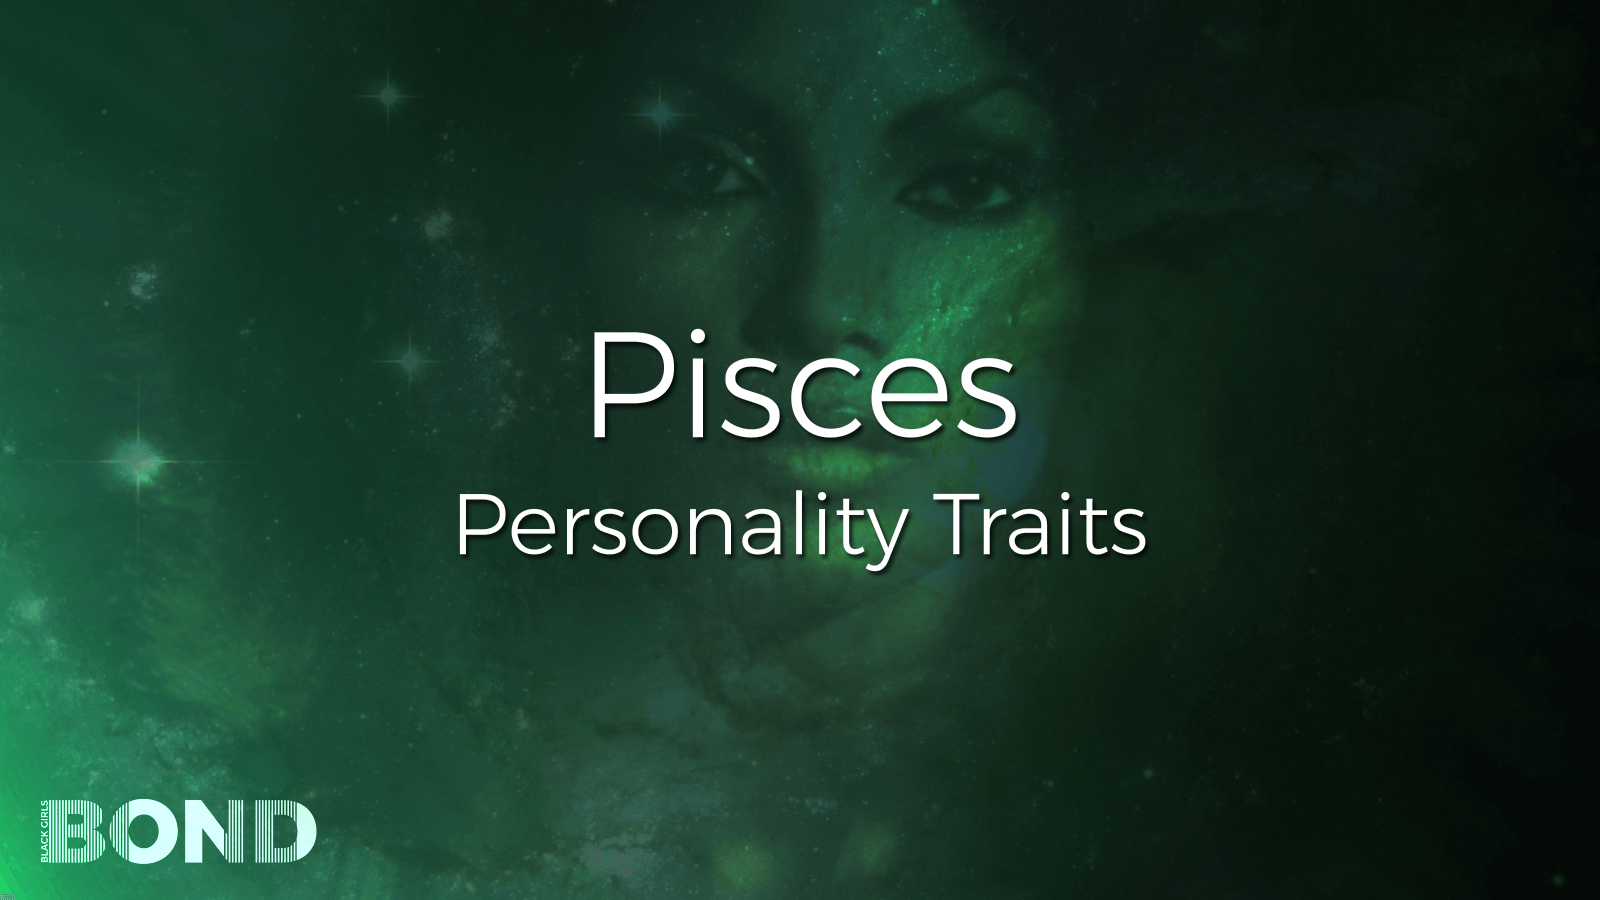 Pisces Zodiac Sign: Personality Traits, Compatibility, Love, Relationships and More